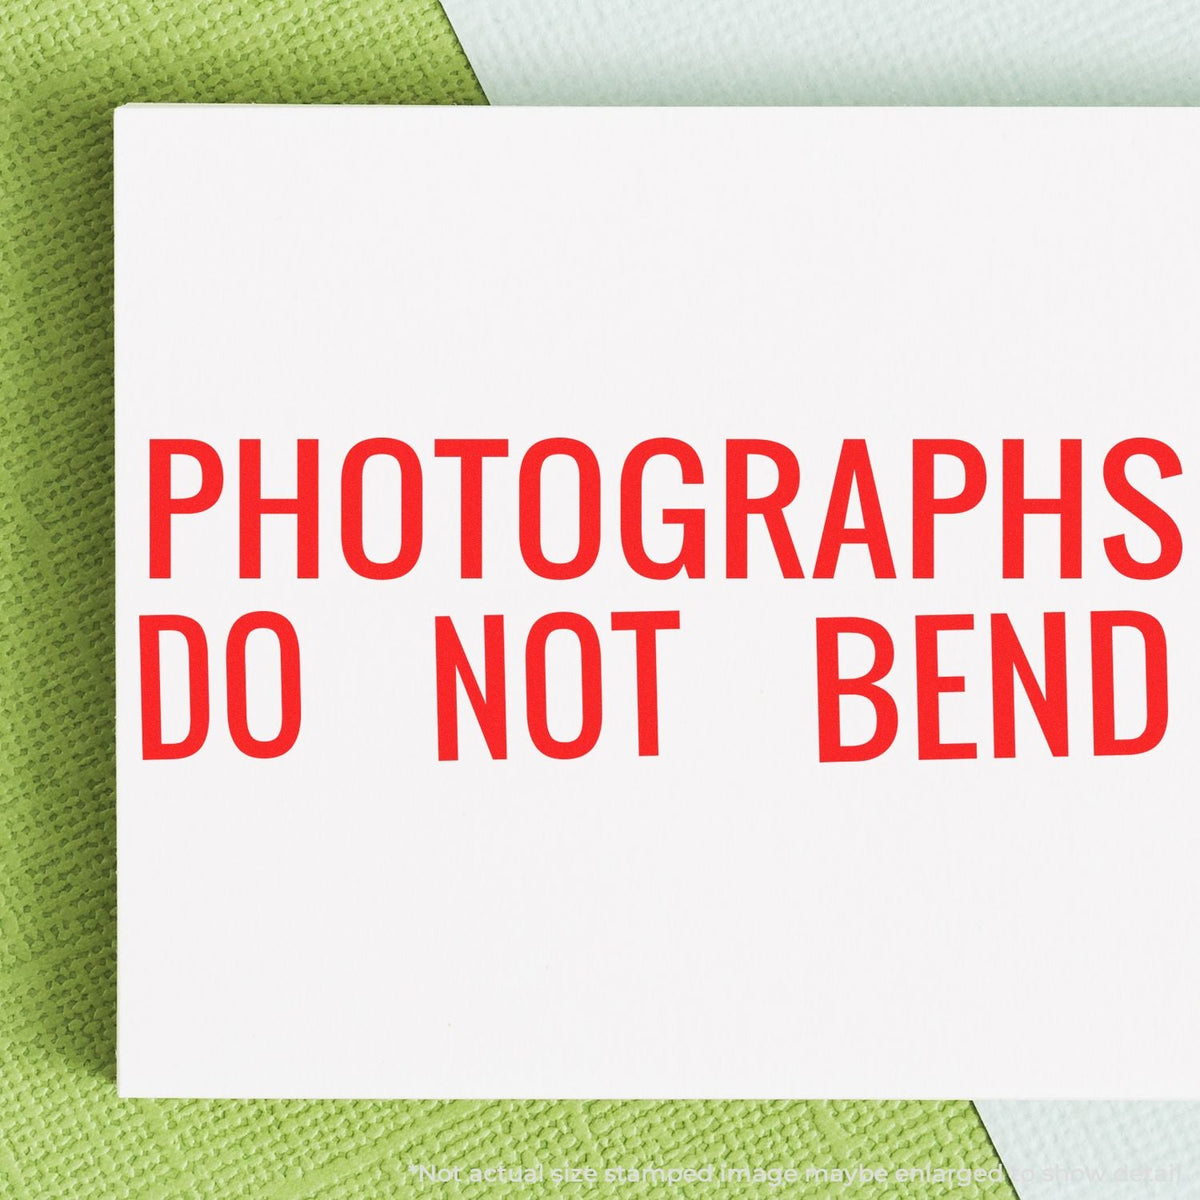 In Use Self-Inking Photographs Do Not Bend Stamp Image